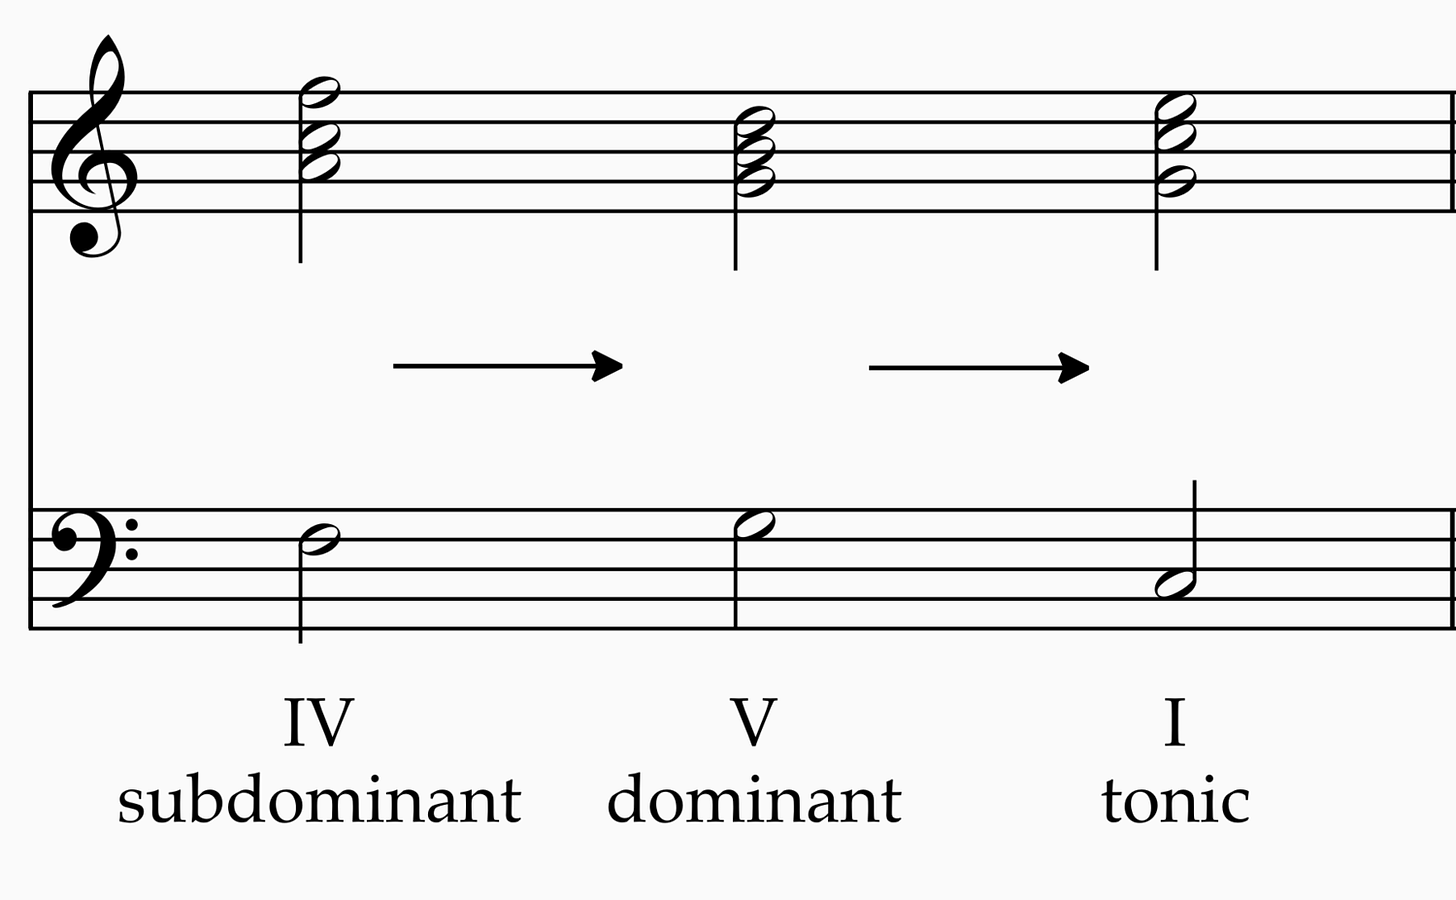 Figure 14. The IV prepares the ear for the V. The V prepares the ear for the I. Like a falling apple, the harmony moves closer and closer to the stable ground of C major.